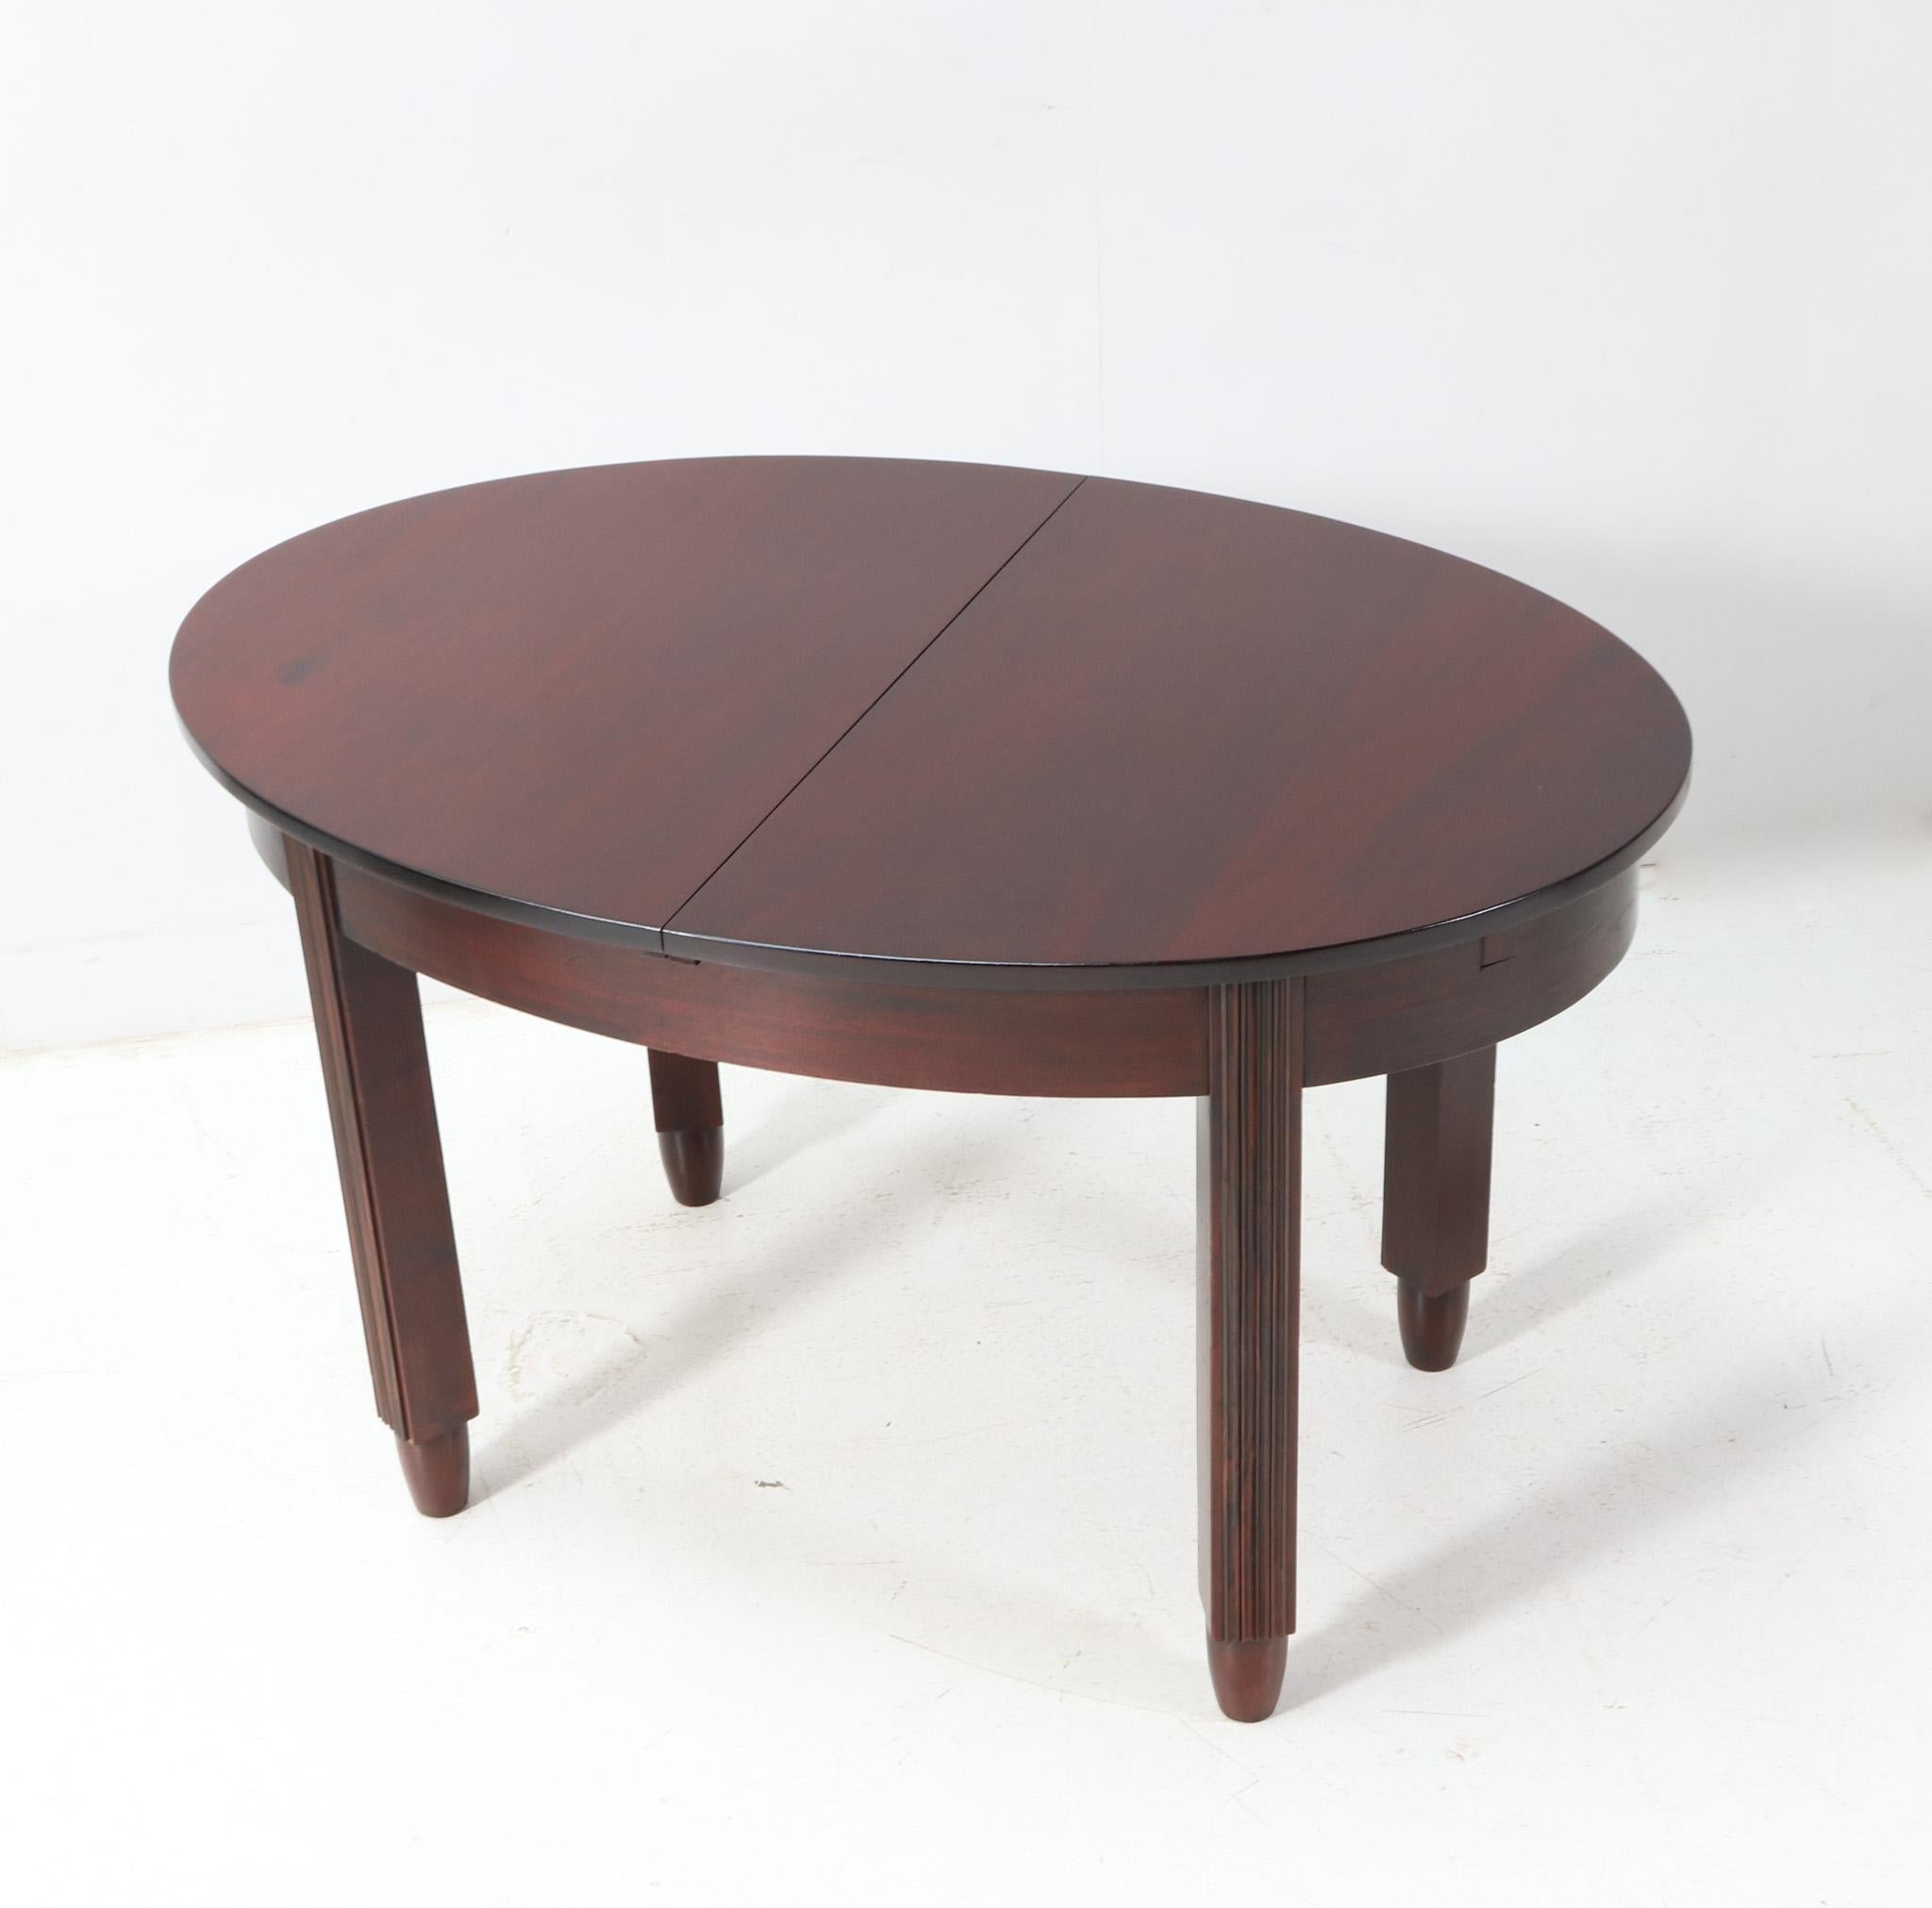 Stunning and rare Art Deco Amsterdamse School extendable dining room table.
Design by Fa. Drilling Amsterdam.
Striking Dutch design from the 1920s.
Solid walnut base with solid macassar ebony decorations at the front of the four legs.
Original solid